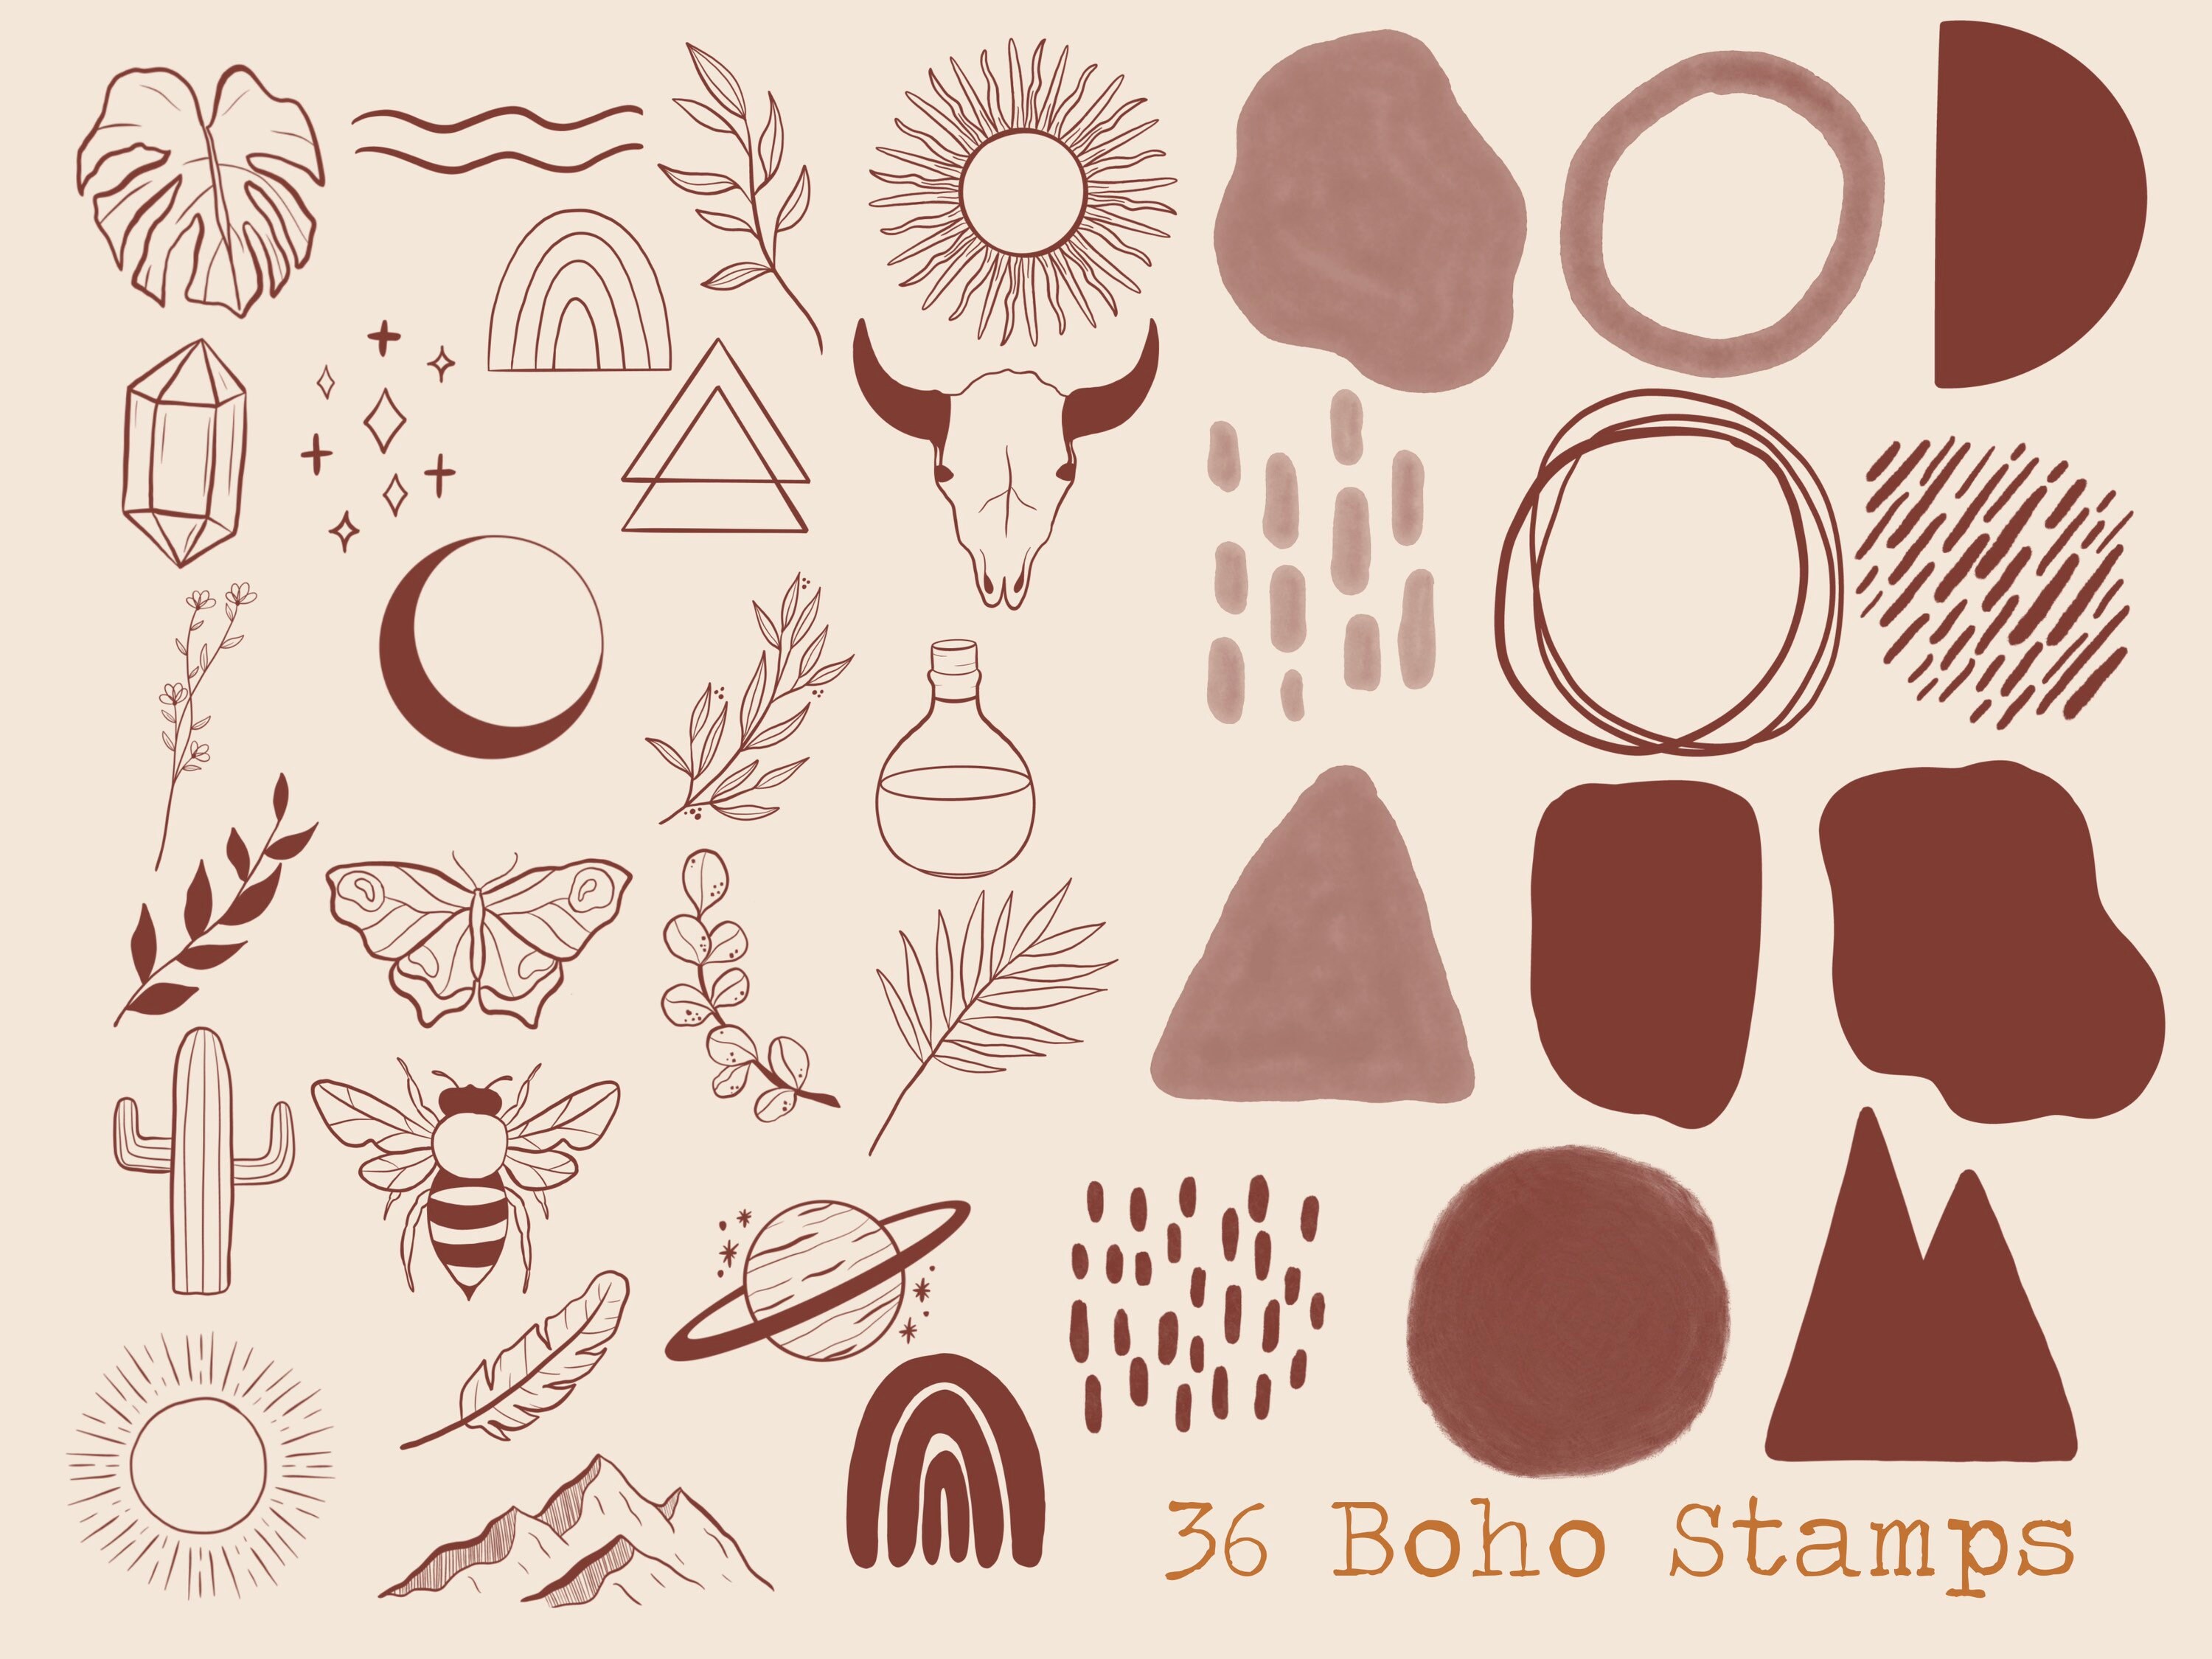 Boho Procreate Stamps Abstract Procreate Stamps Doodle | Etsy